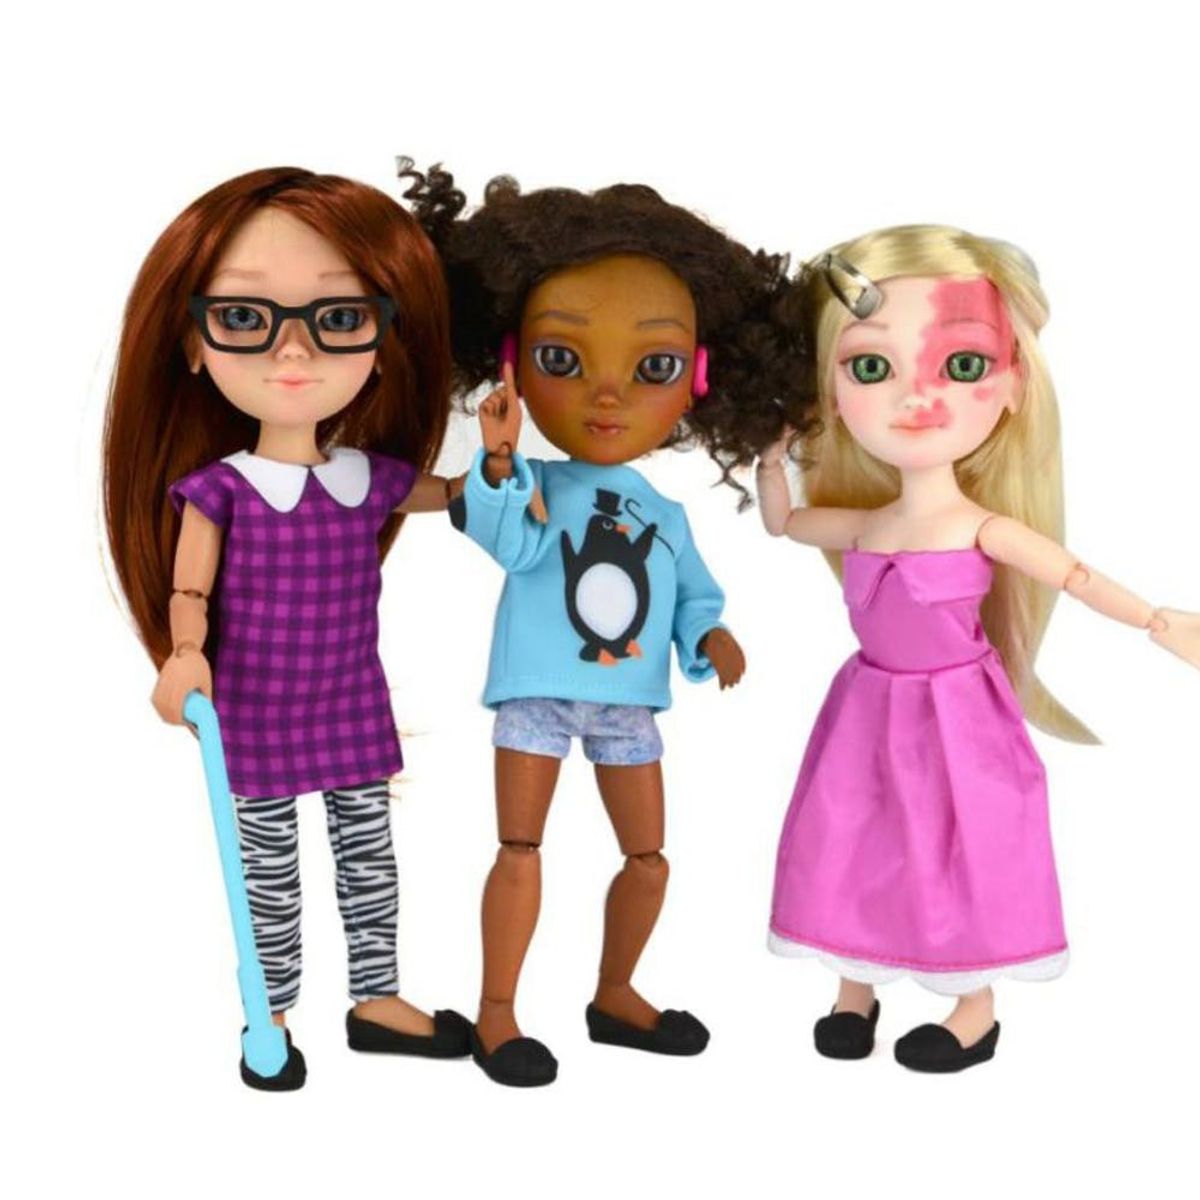 These Dolls Are Doing Something Big for Kids With Disabilities